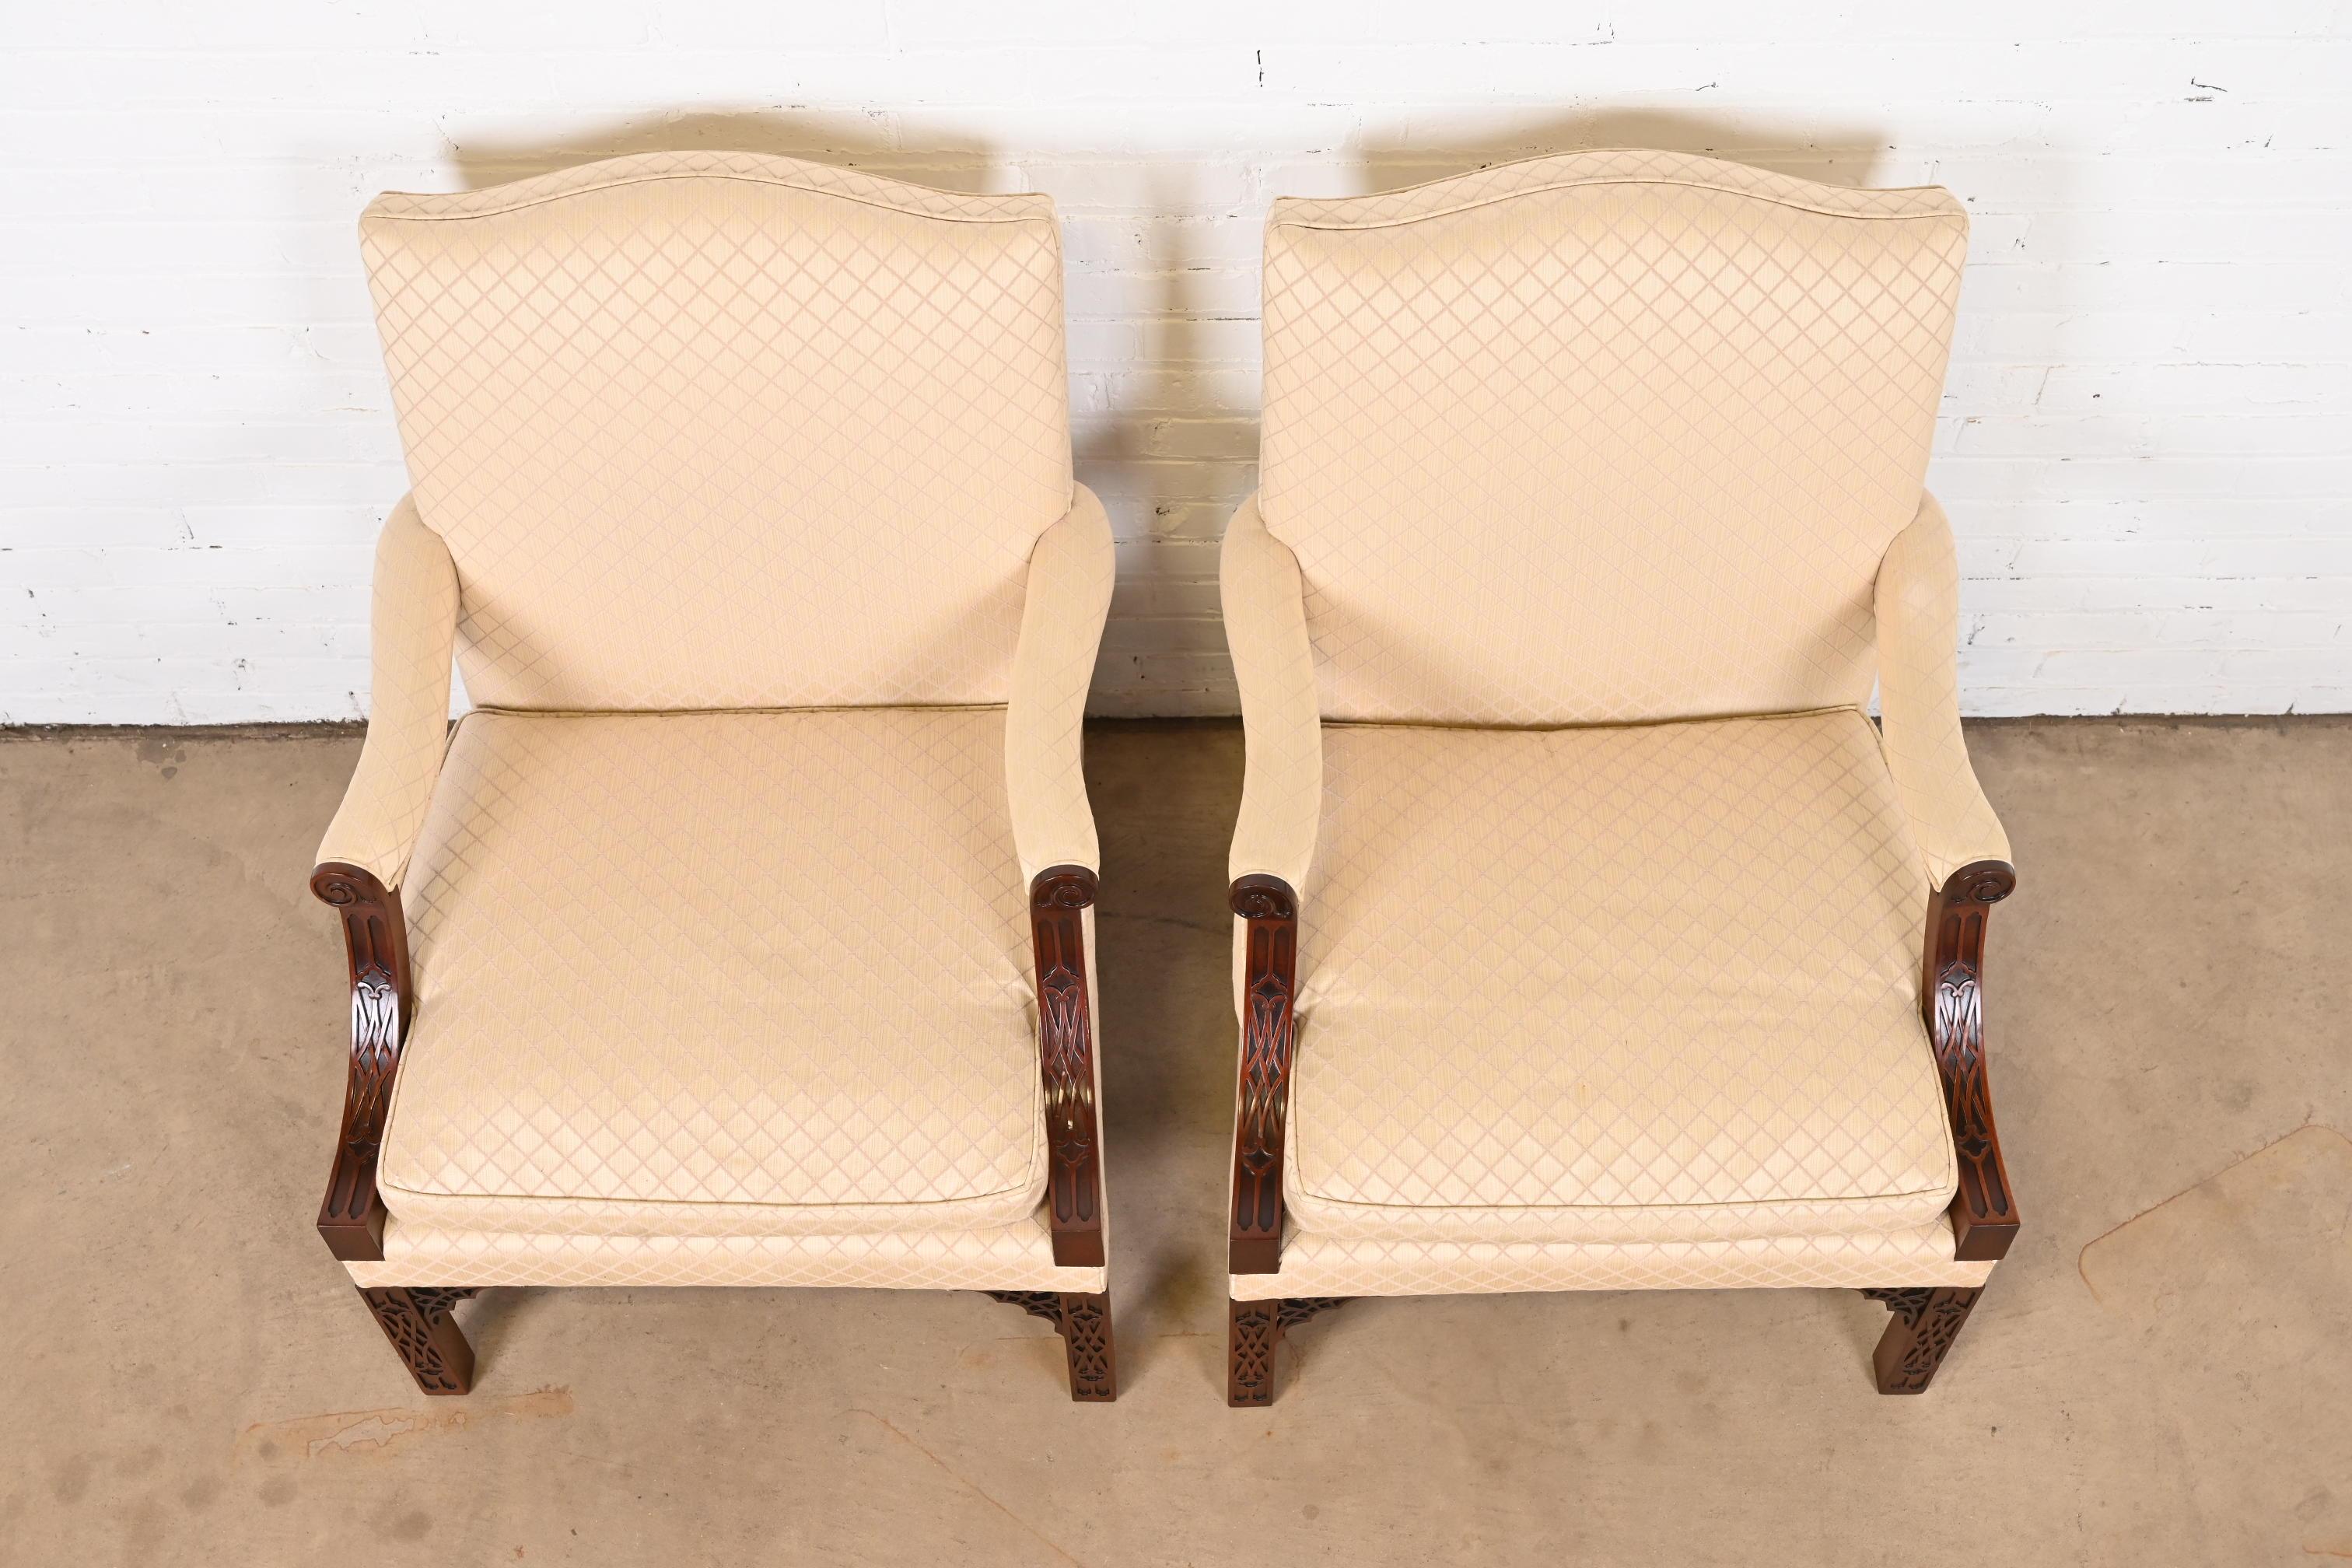 Upholstery Kindel Furniture Chippendale Carved Mahogany Library Chairs, Pair